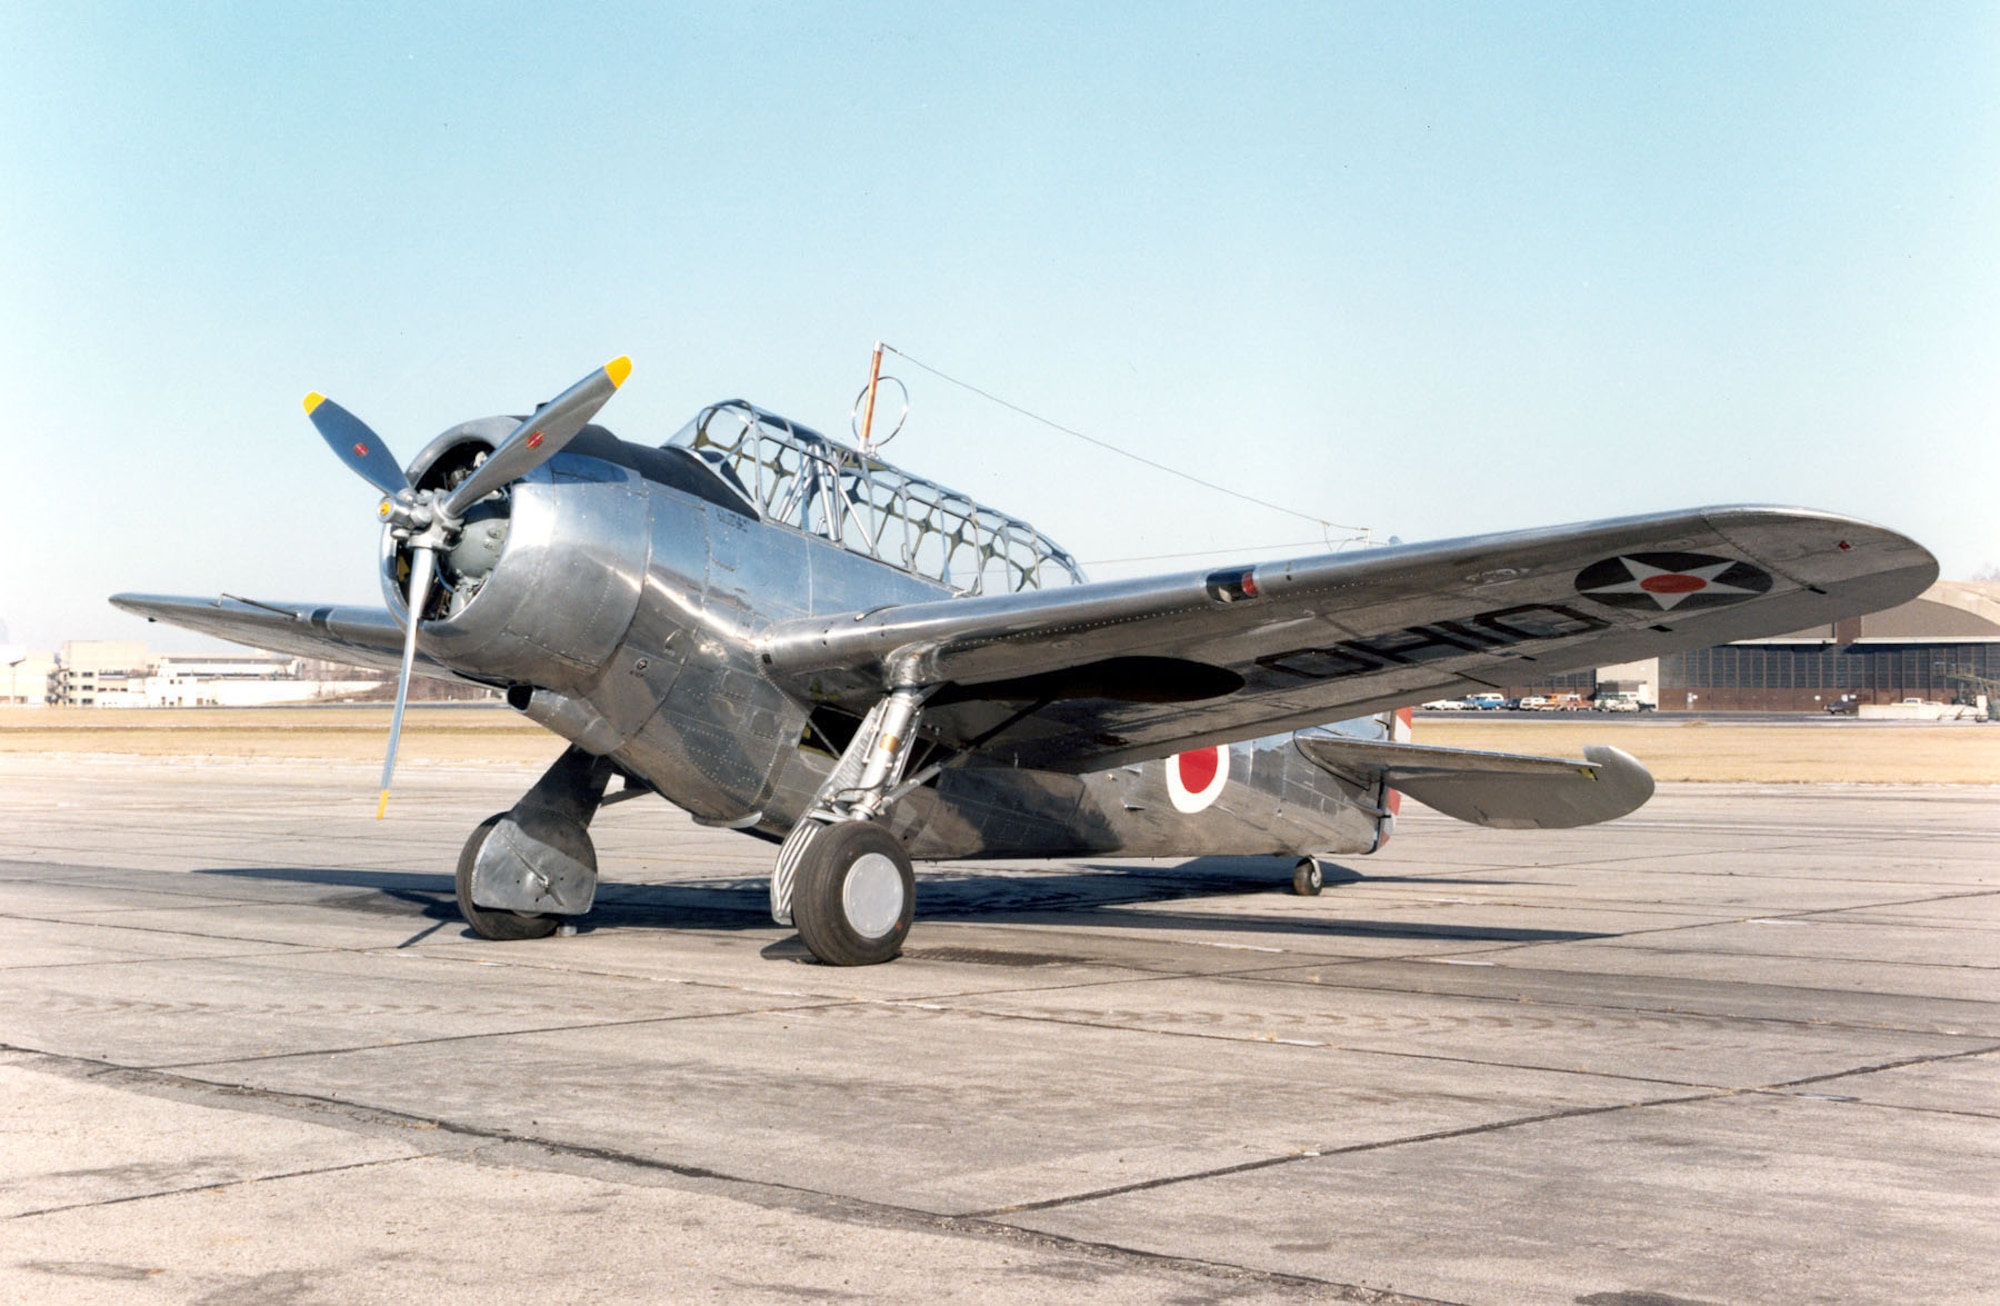 DAYTON, Ohio -- North American O-47B at the National Museum of the United States Air Force. (U.S. Air Force photo)